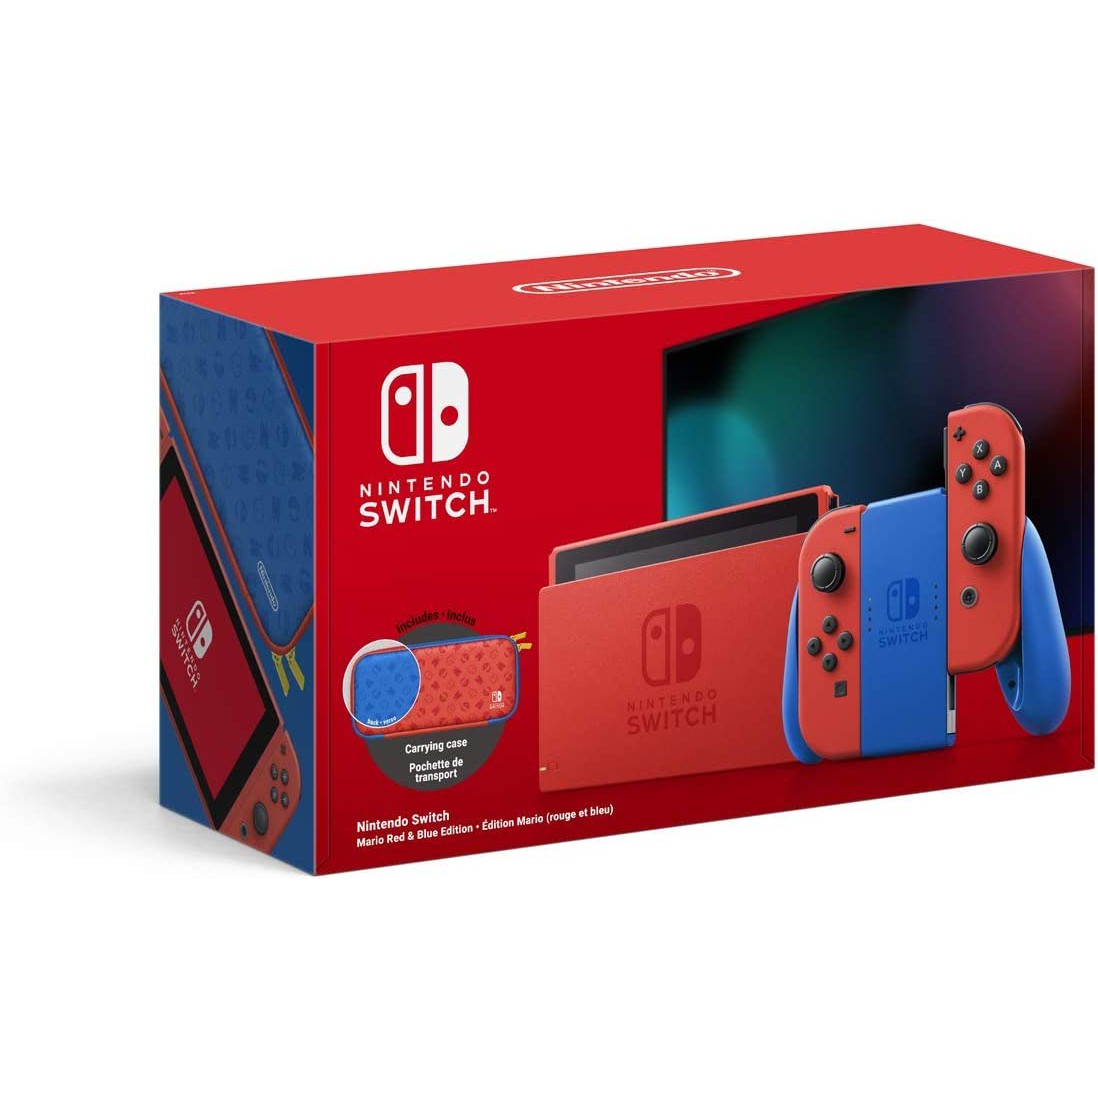 Nintendo Switch Console 32GB - Mario Red & Blue Edition - Refurbished Excellent